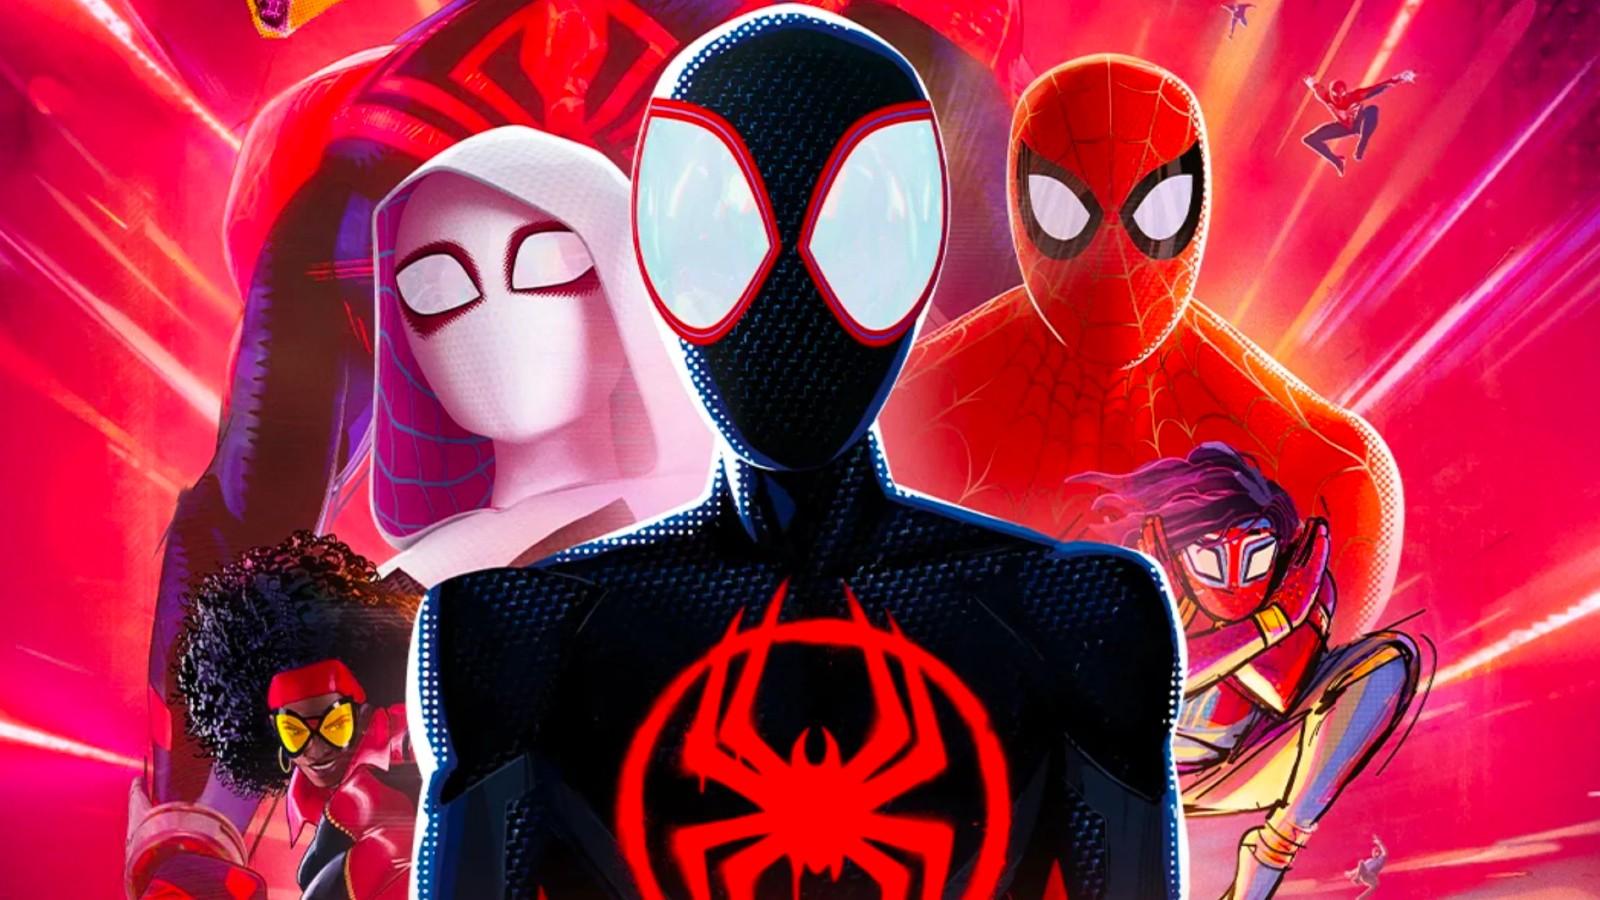 Spider-Man: Into the Spider-Verse Explores the Meaning Behind the